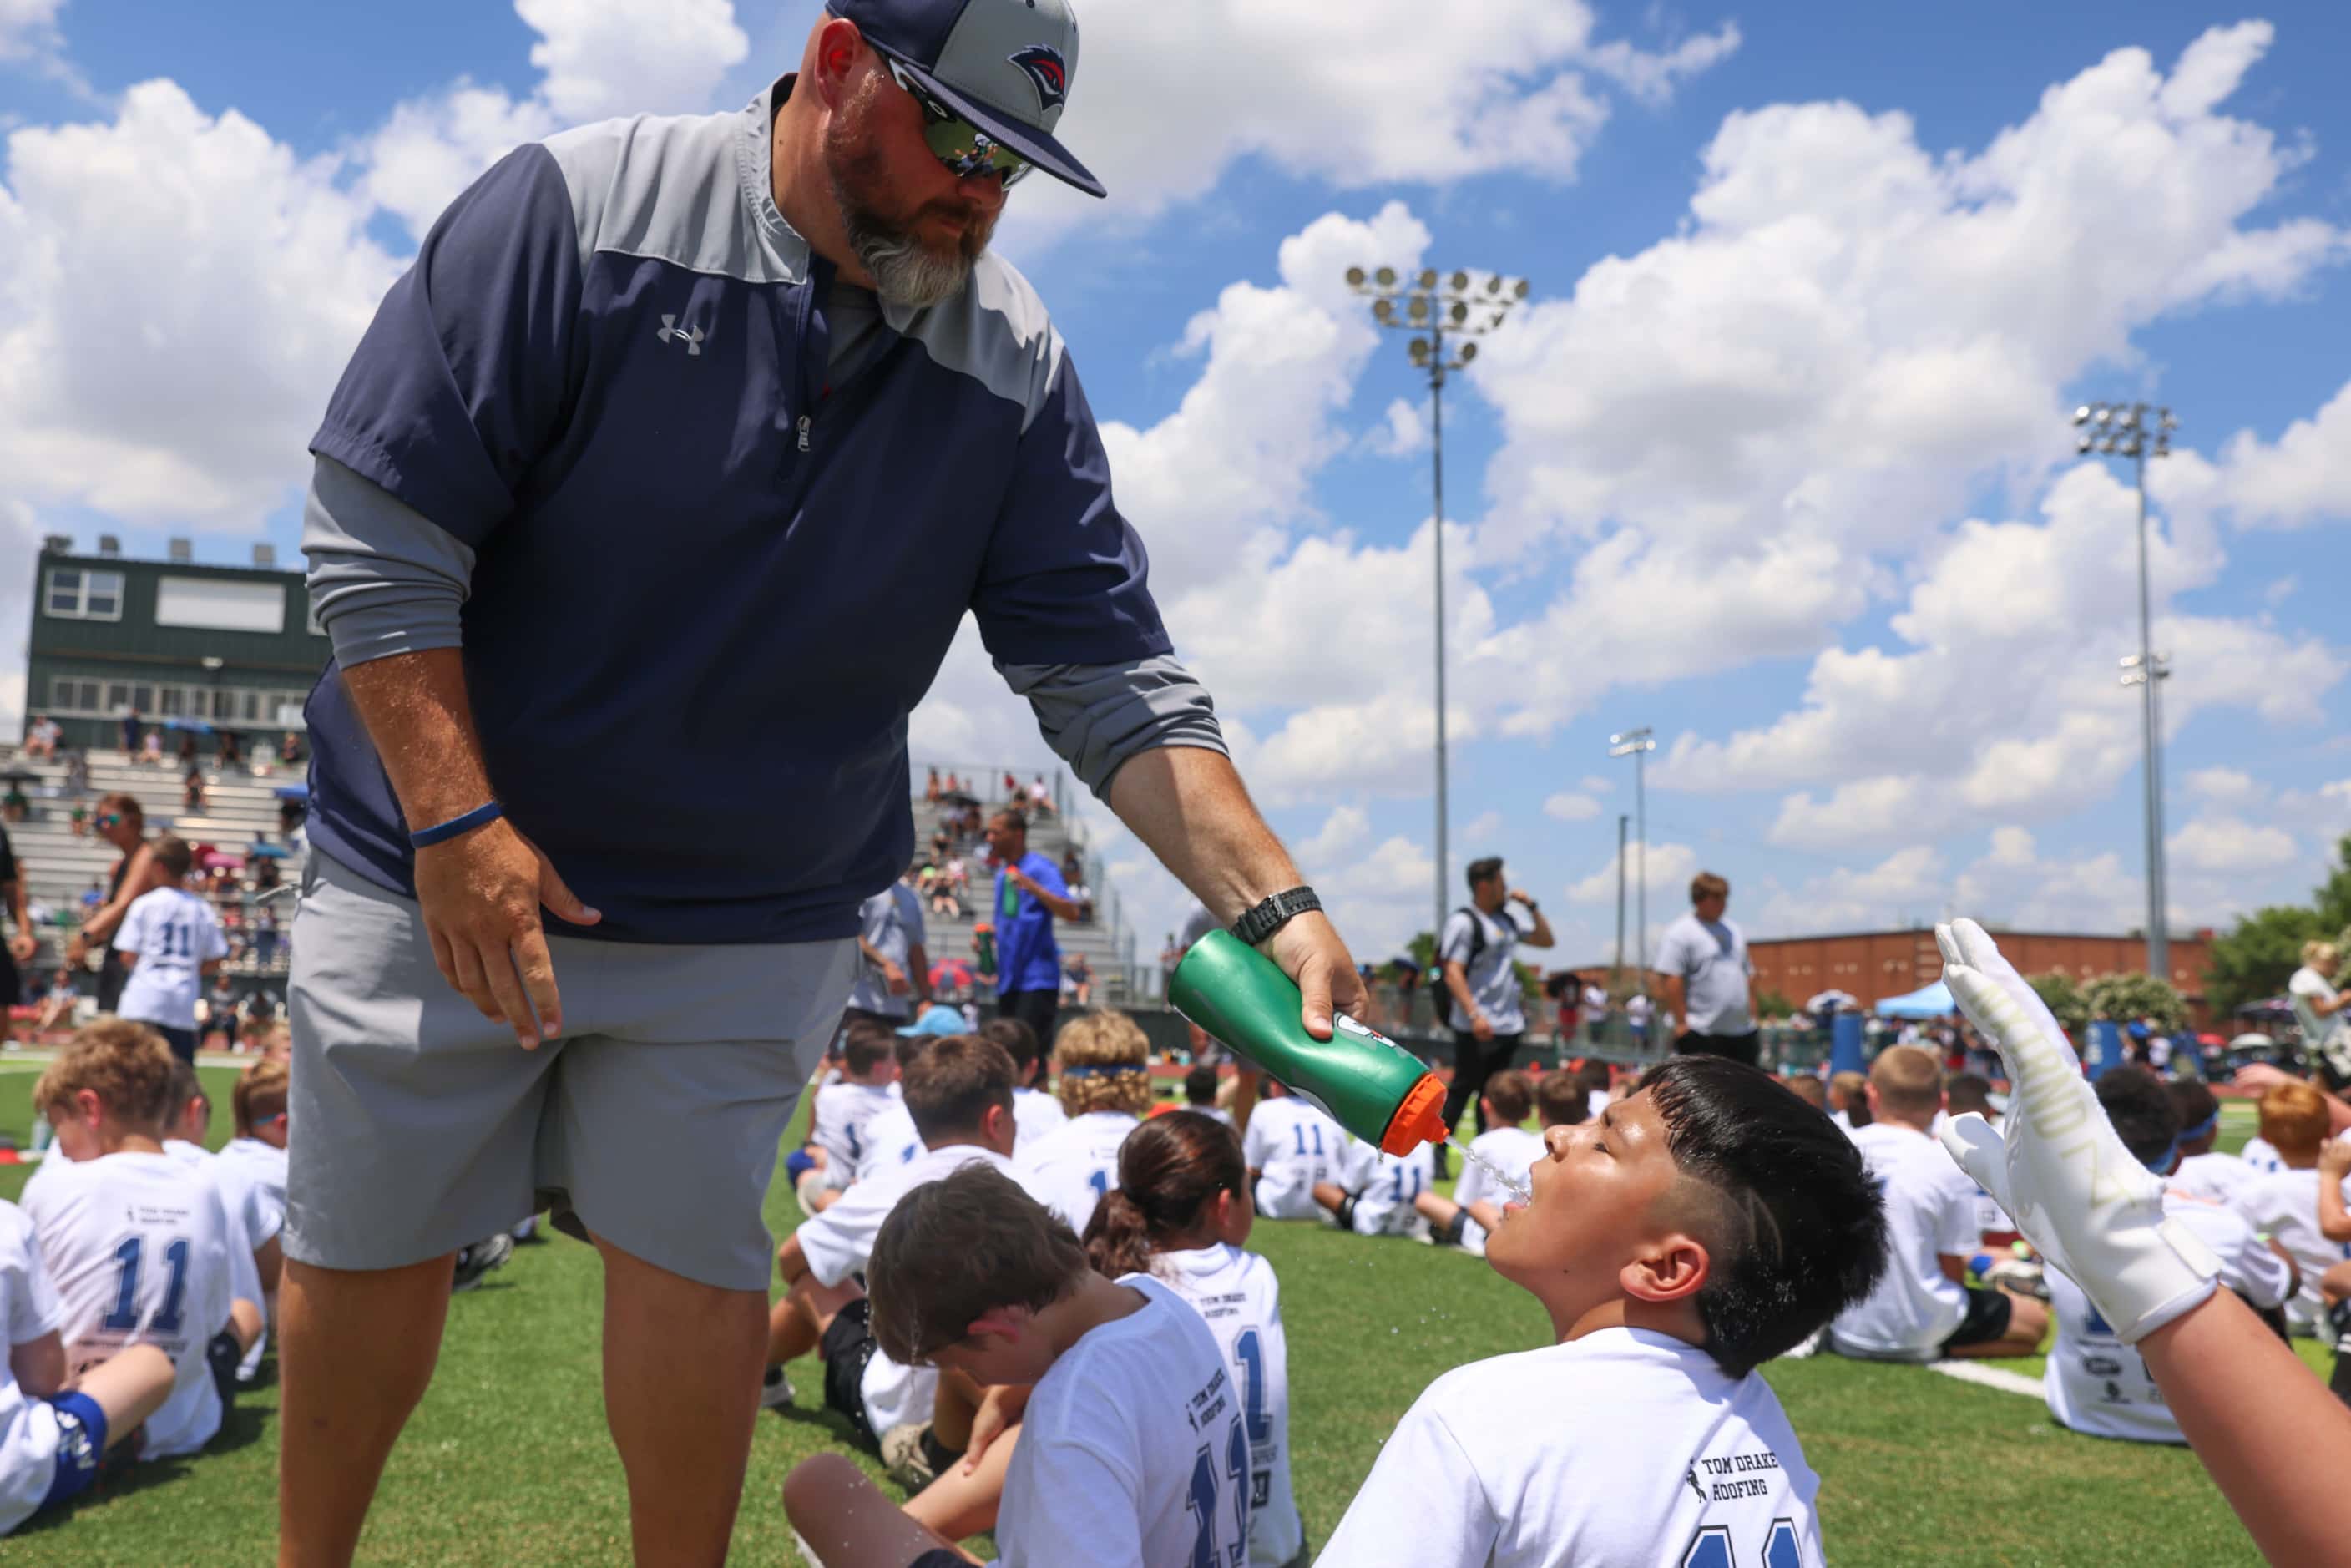 Coach Nick Brown sprays water on young football players as they line up to practice and...